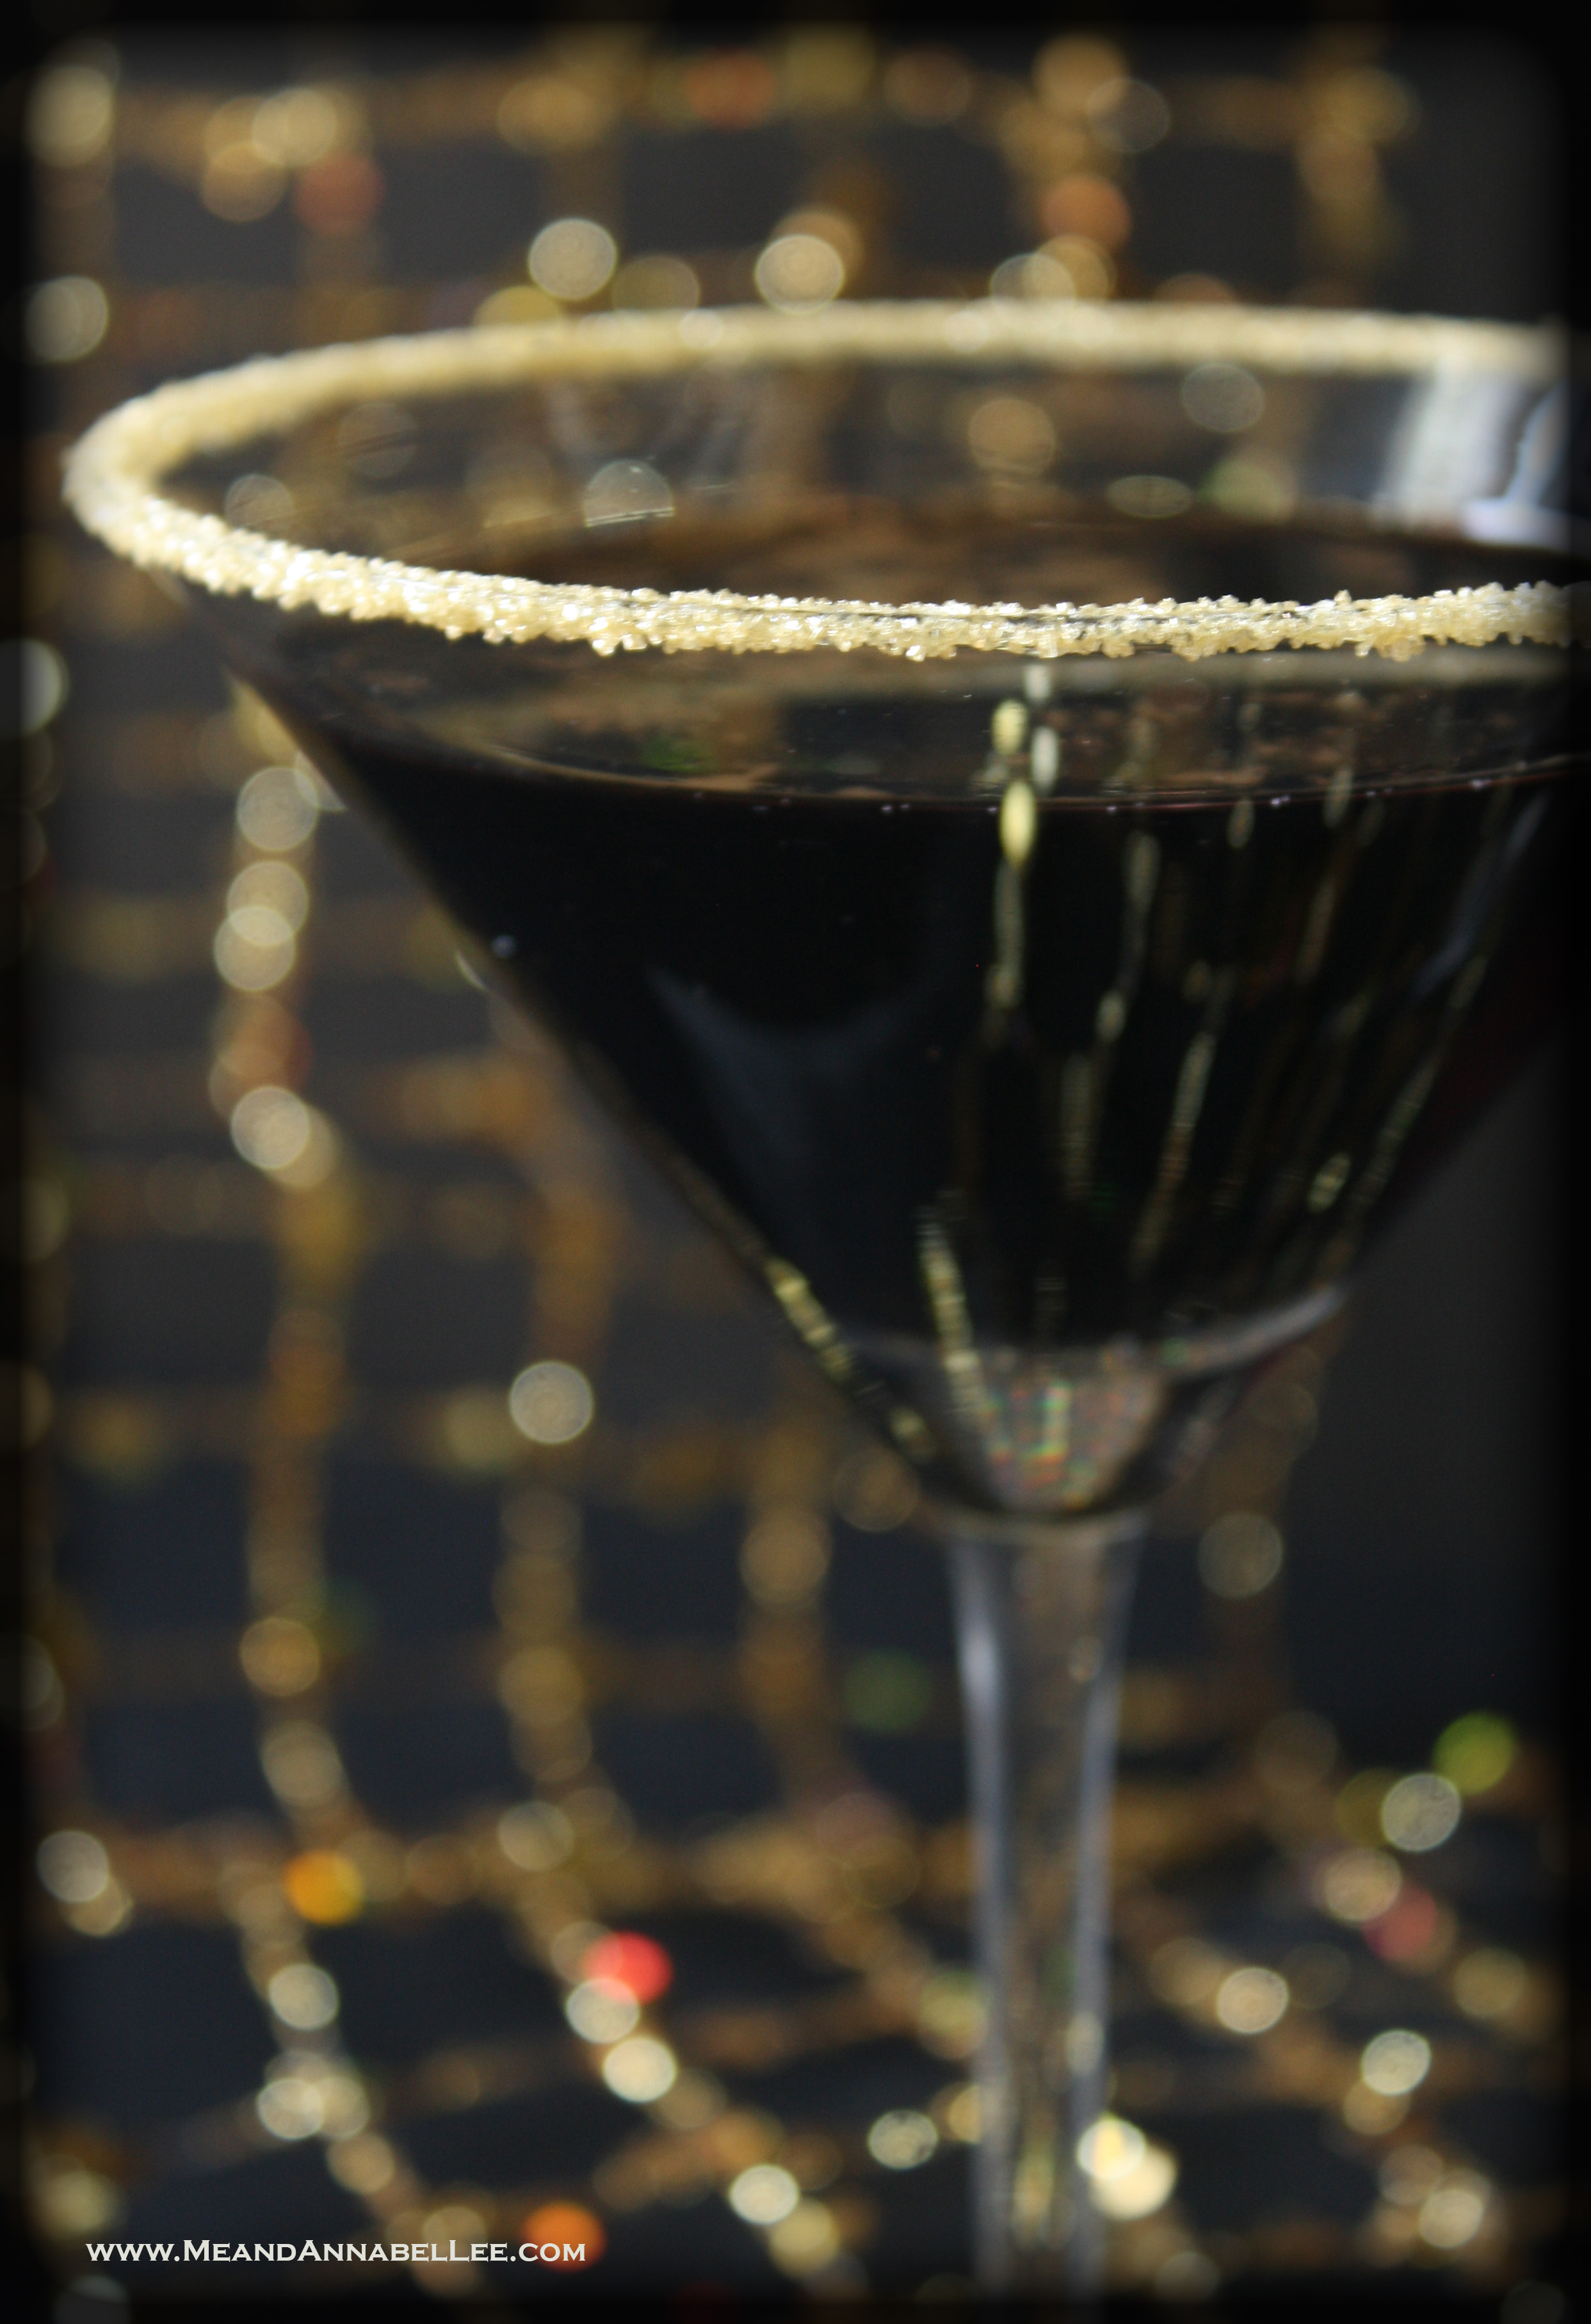 24 karat Gold Black Martini | New Years Eve | Gothic Cocktail | www.MeandAnnabelLee.com